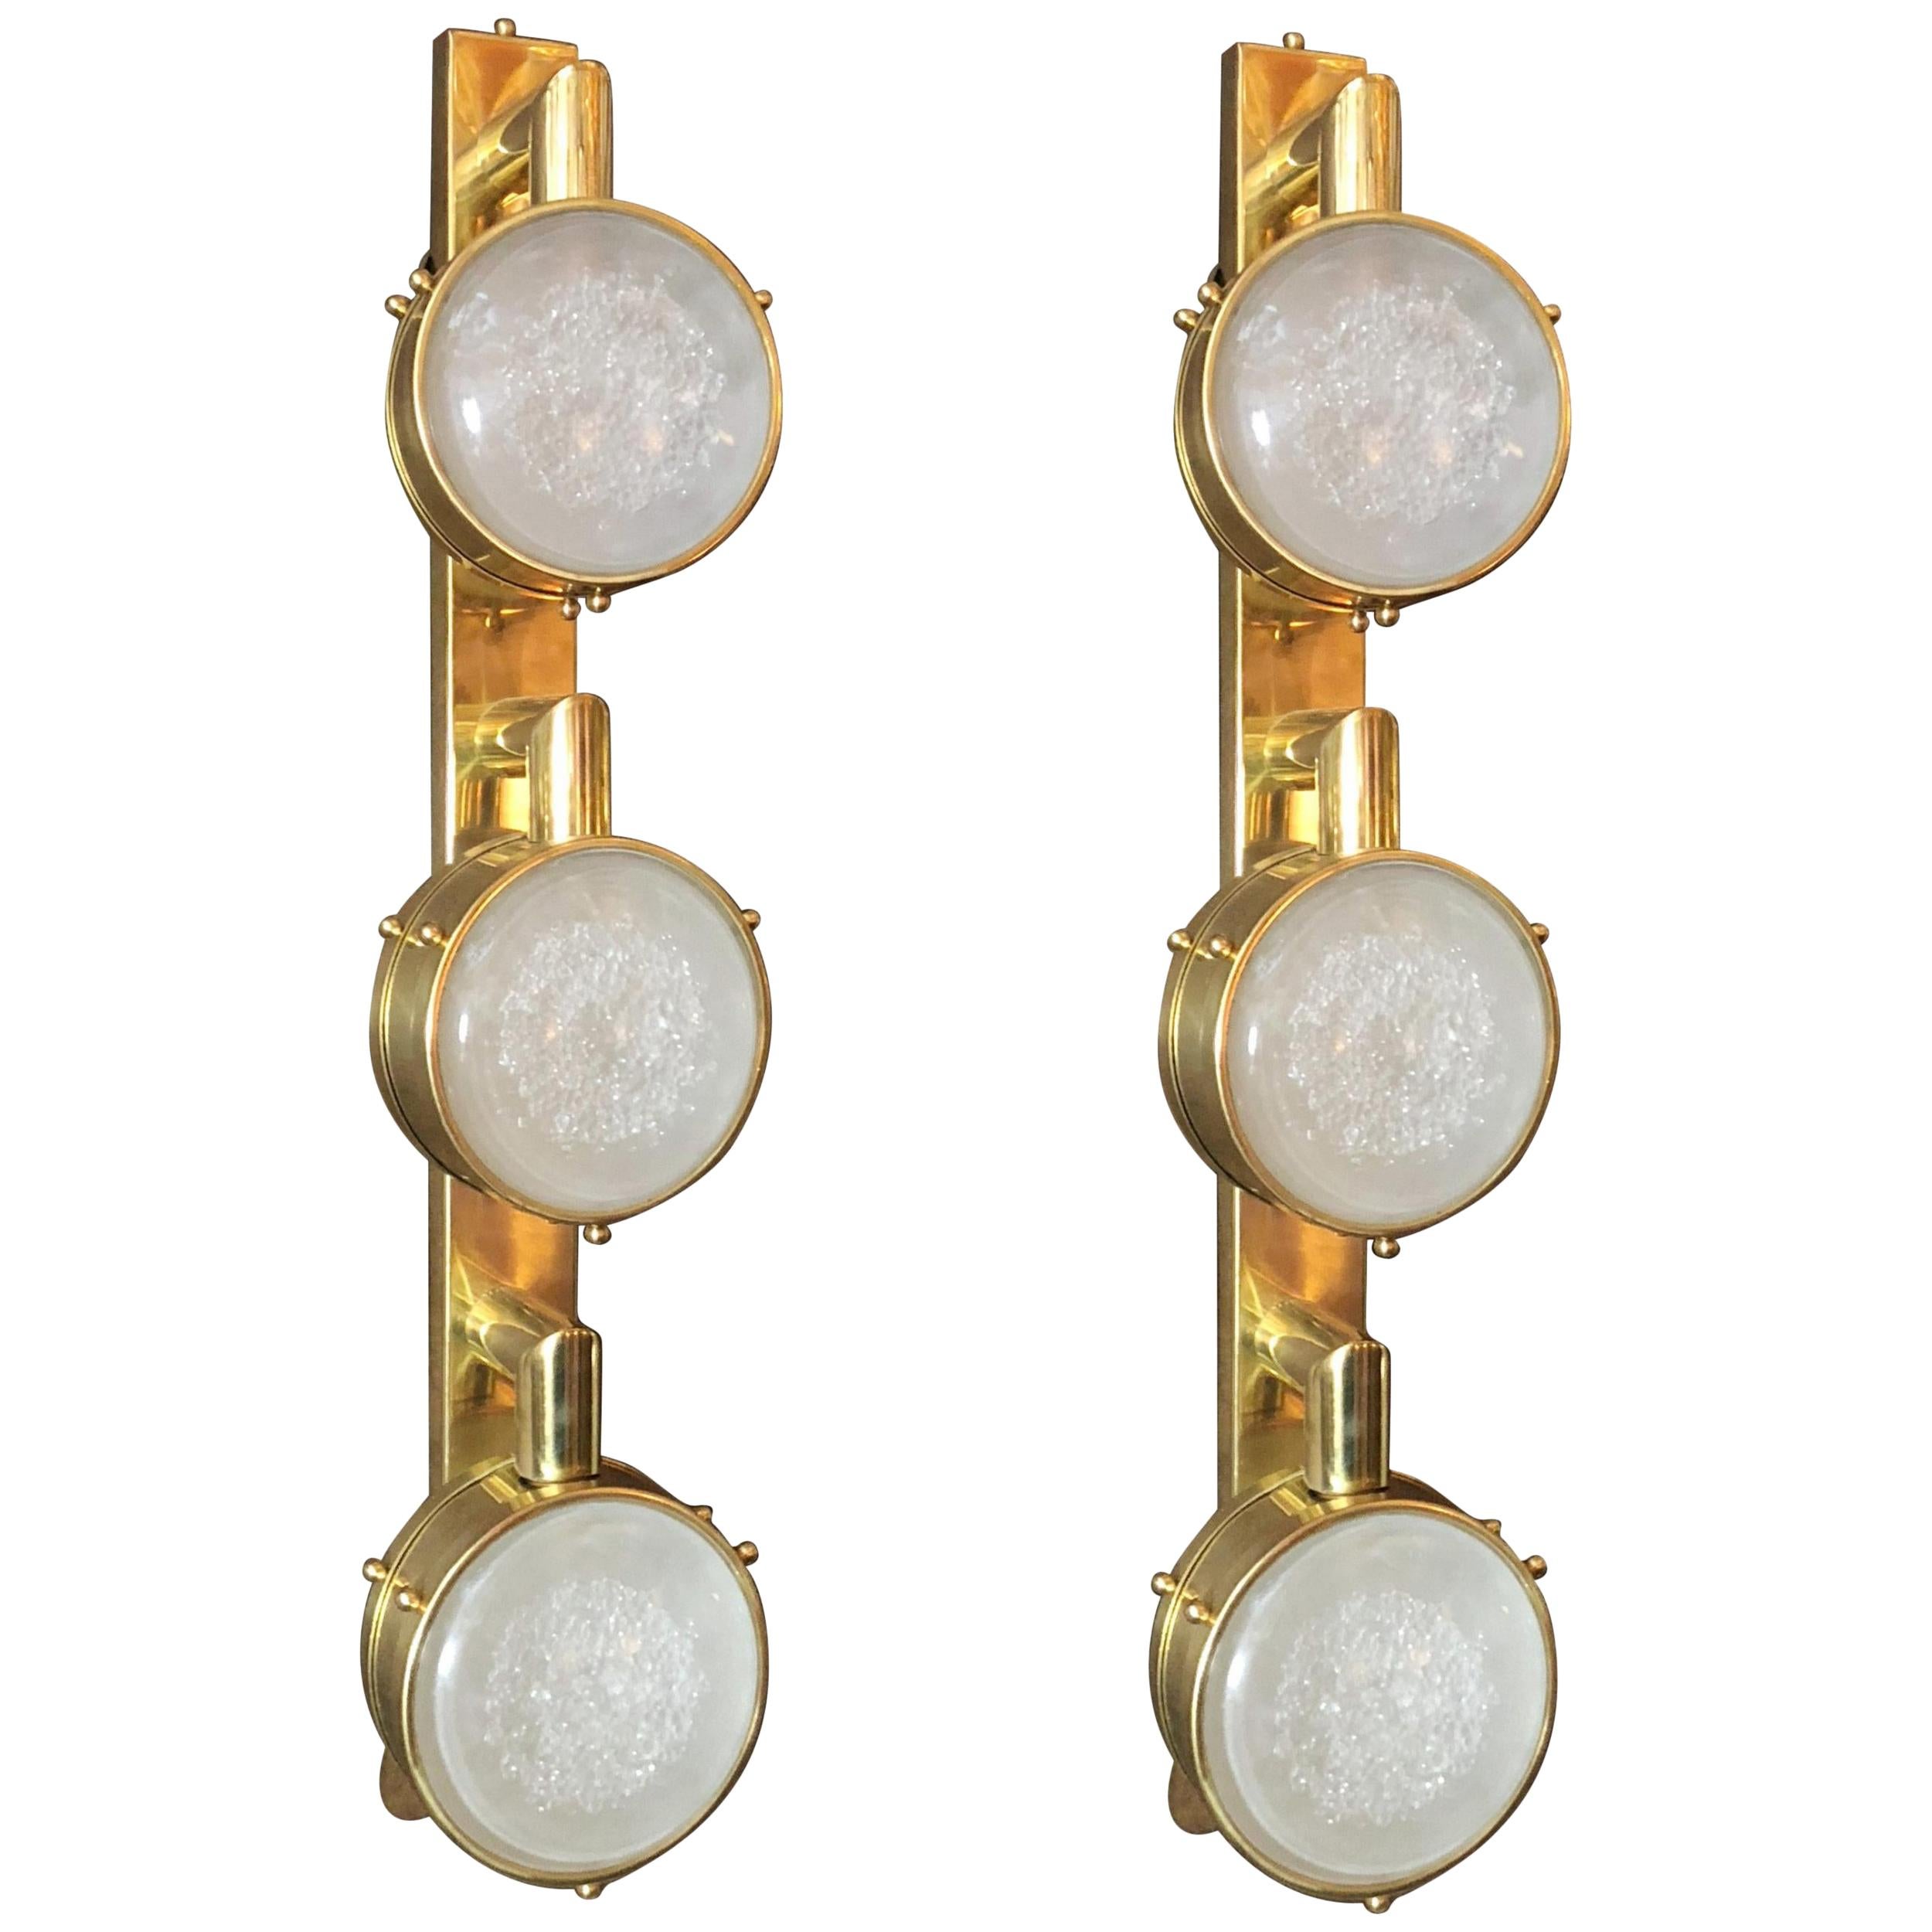 Limited Edition Pair of Murano Frosted Glass Sconces, circa 1990s